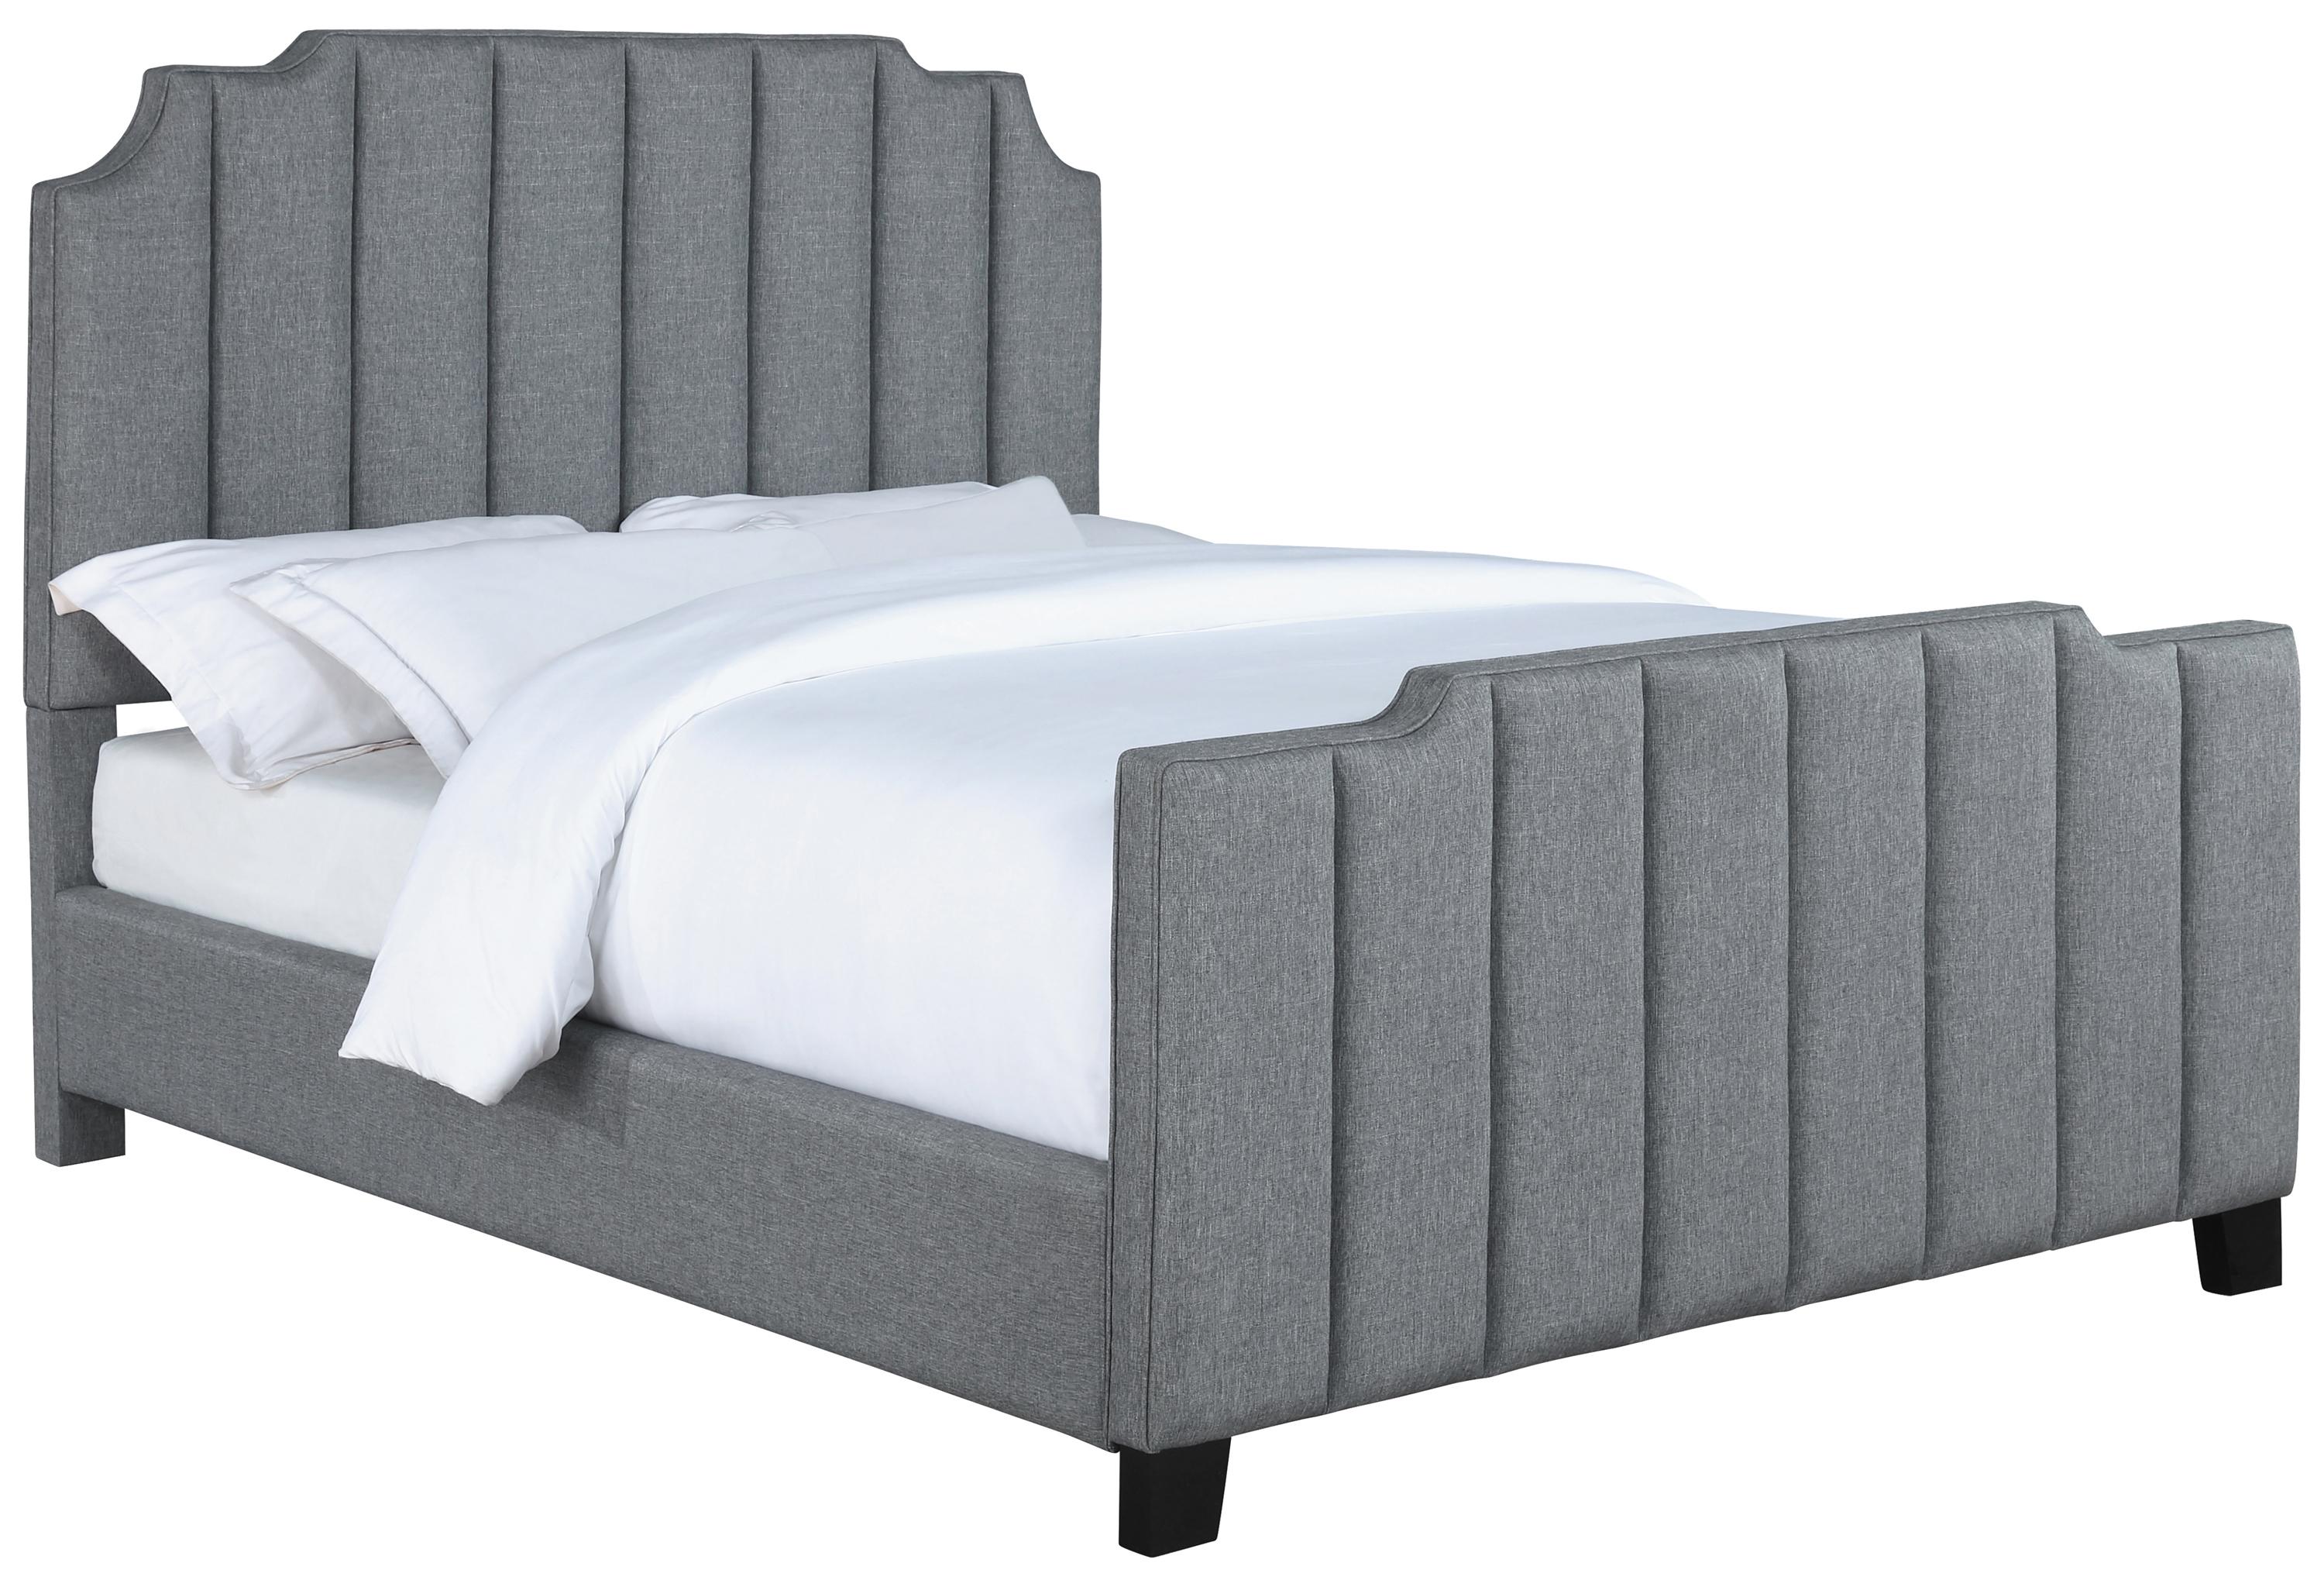 Contemporary Bed 306029Q Fiona 306029Q in Light Gray Fabric